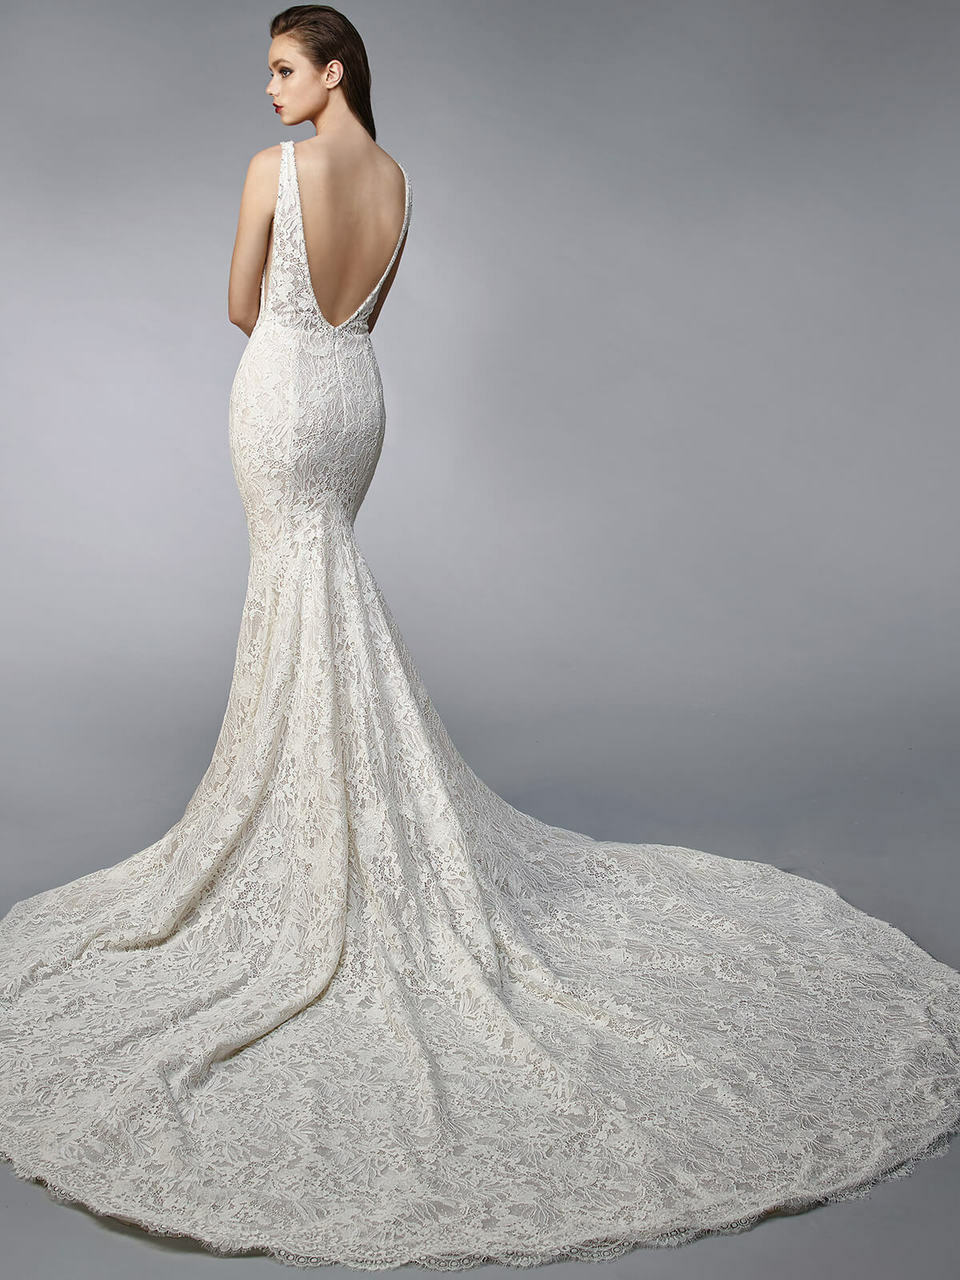 The Neptune Gown by Enzoani Size 10